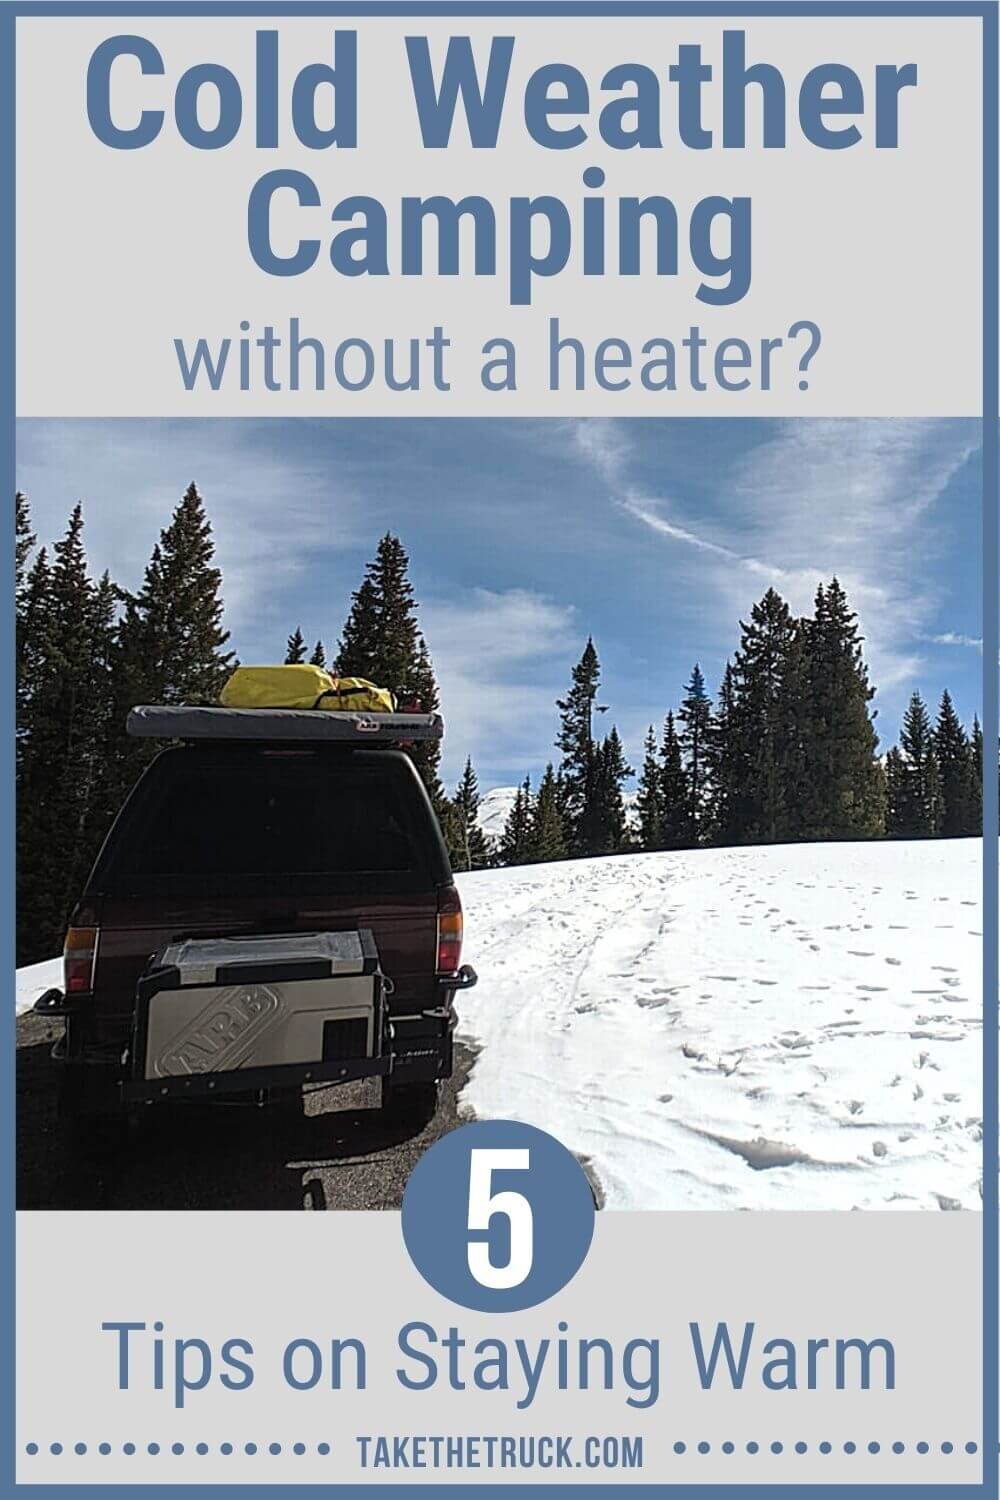 Cold weather truck camping doesn’t need to be uncomfortable! This post is full of ideas to help you stay warm and comfortable when doing some winter and cold weather truck camping.